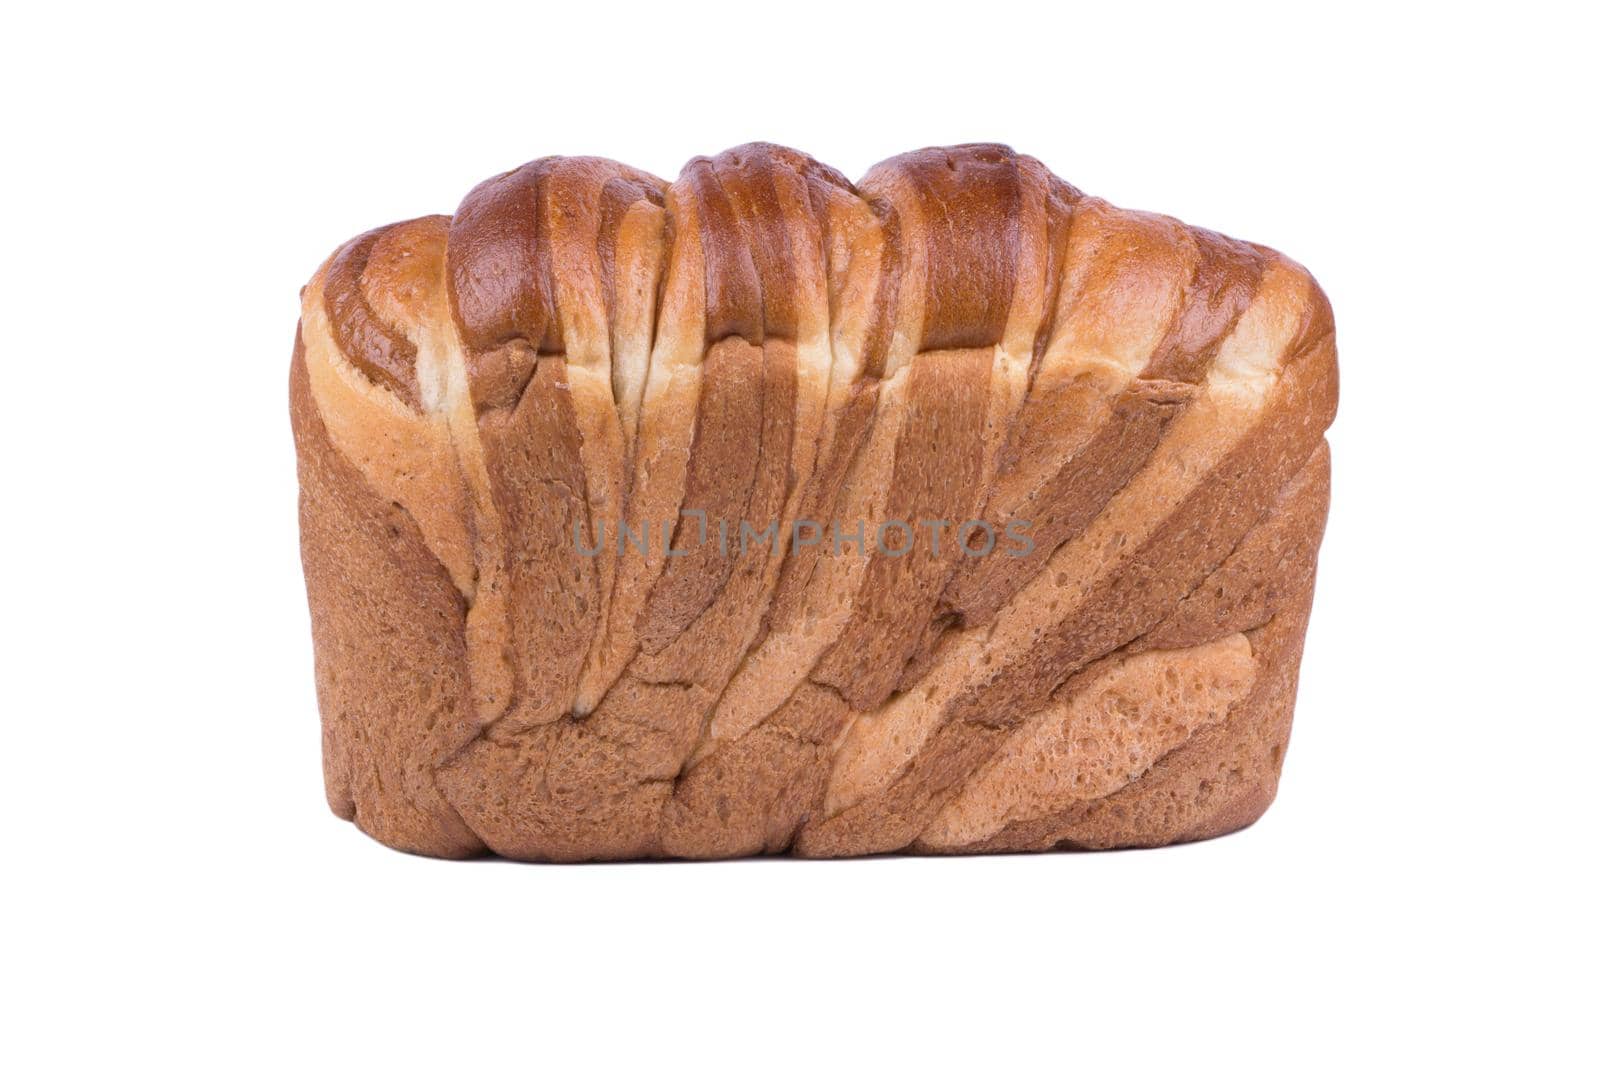 A loaf of homemade bread isolated on white background